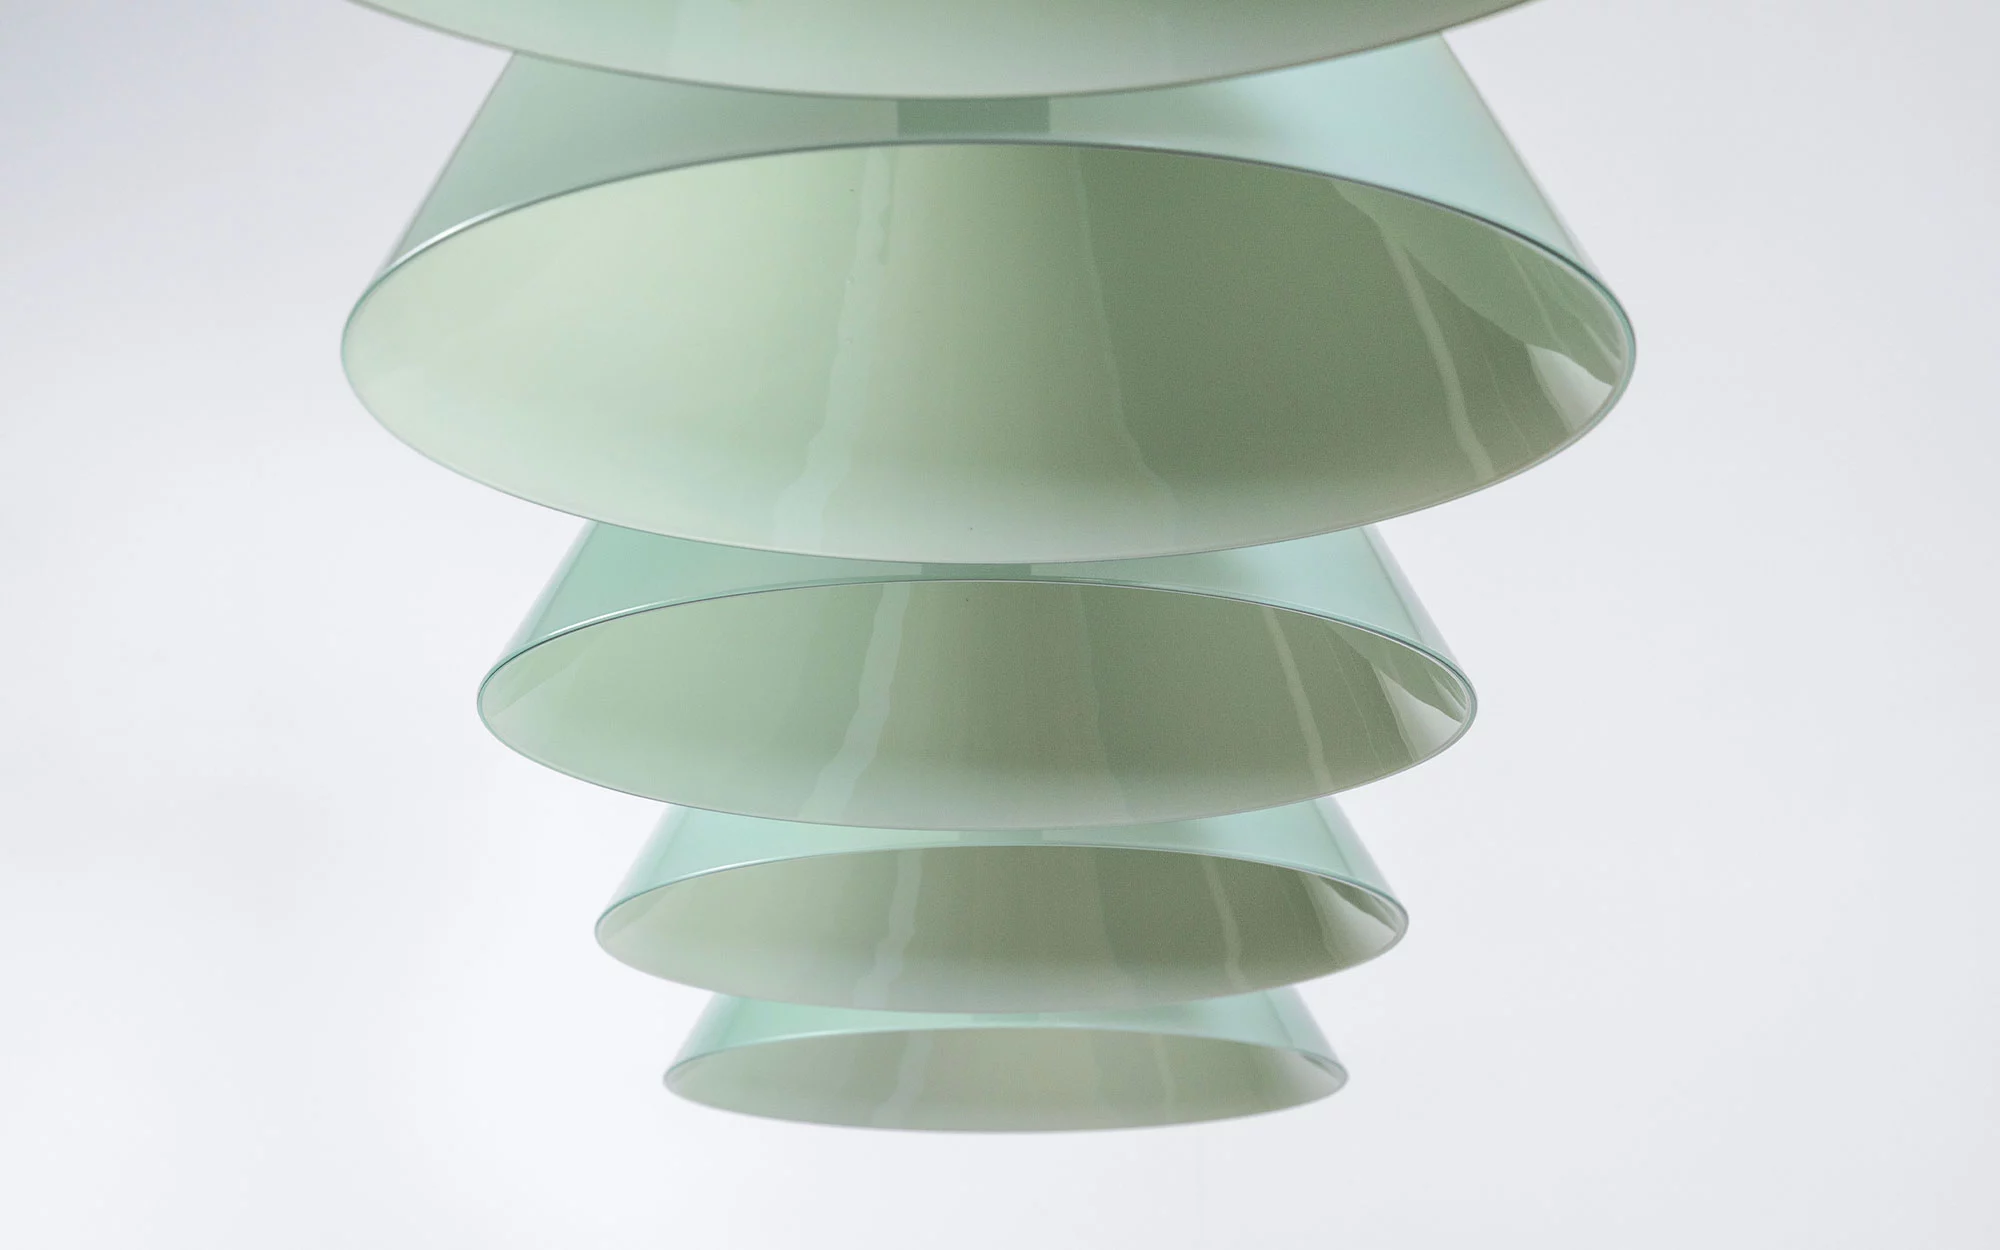 Signal C6 POLYCHROMATIC - Edward and Jay Barber and Osgerby - Pendant light - Galerie kreo